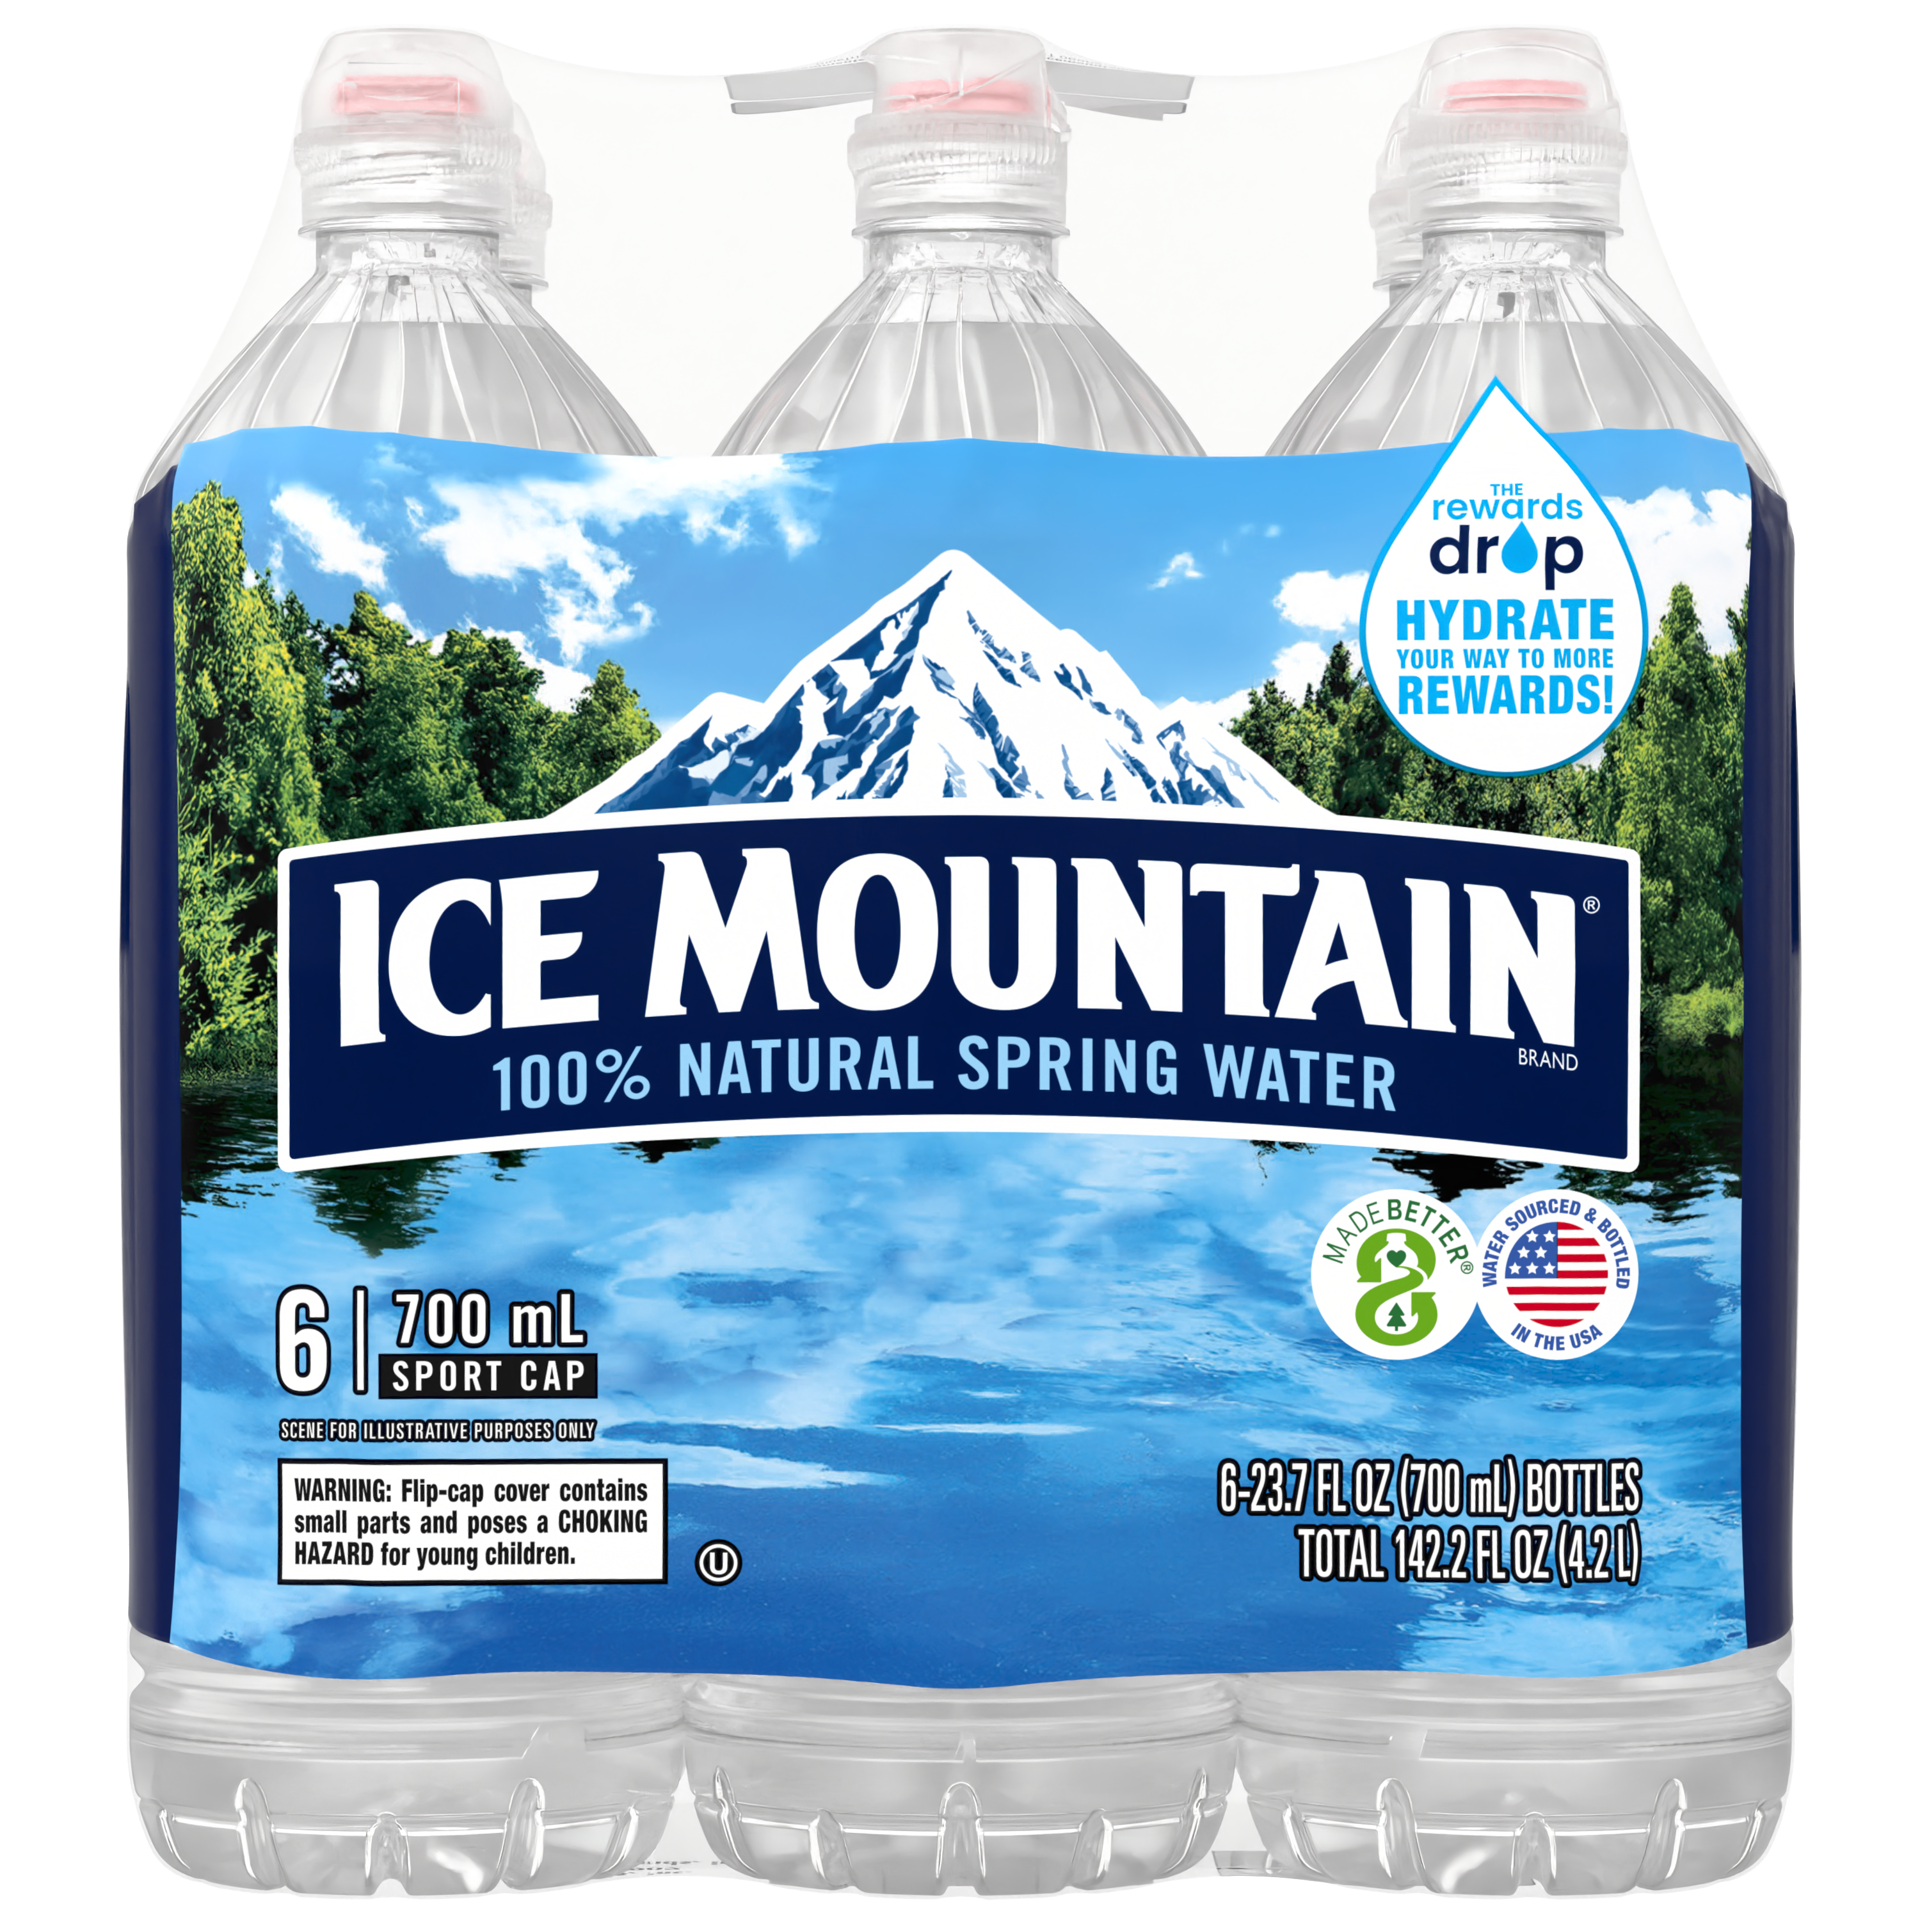 slide 1 of 1, ICE MOUNTAIN Brand 100% Natural Spring Water, 23.7-ounce plastic sport cap bottles (Pack of 6), 23.7 oz